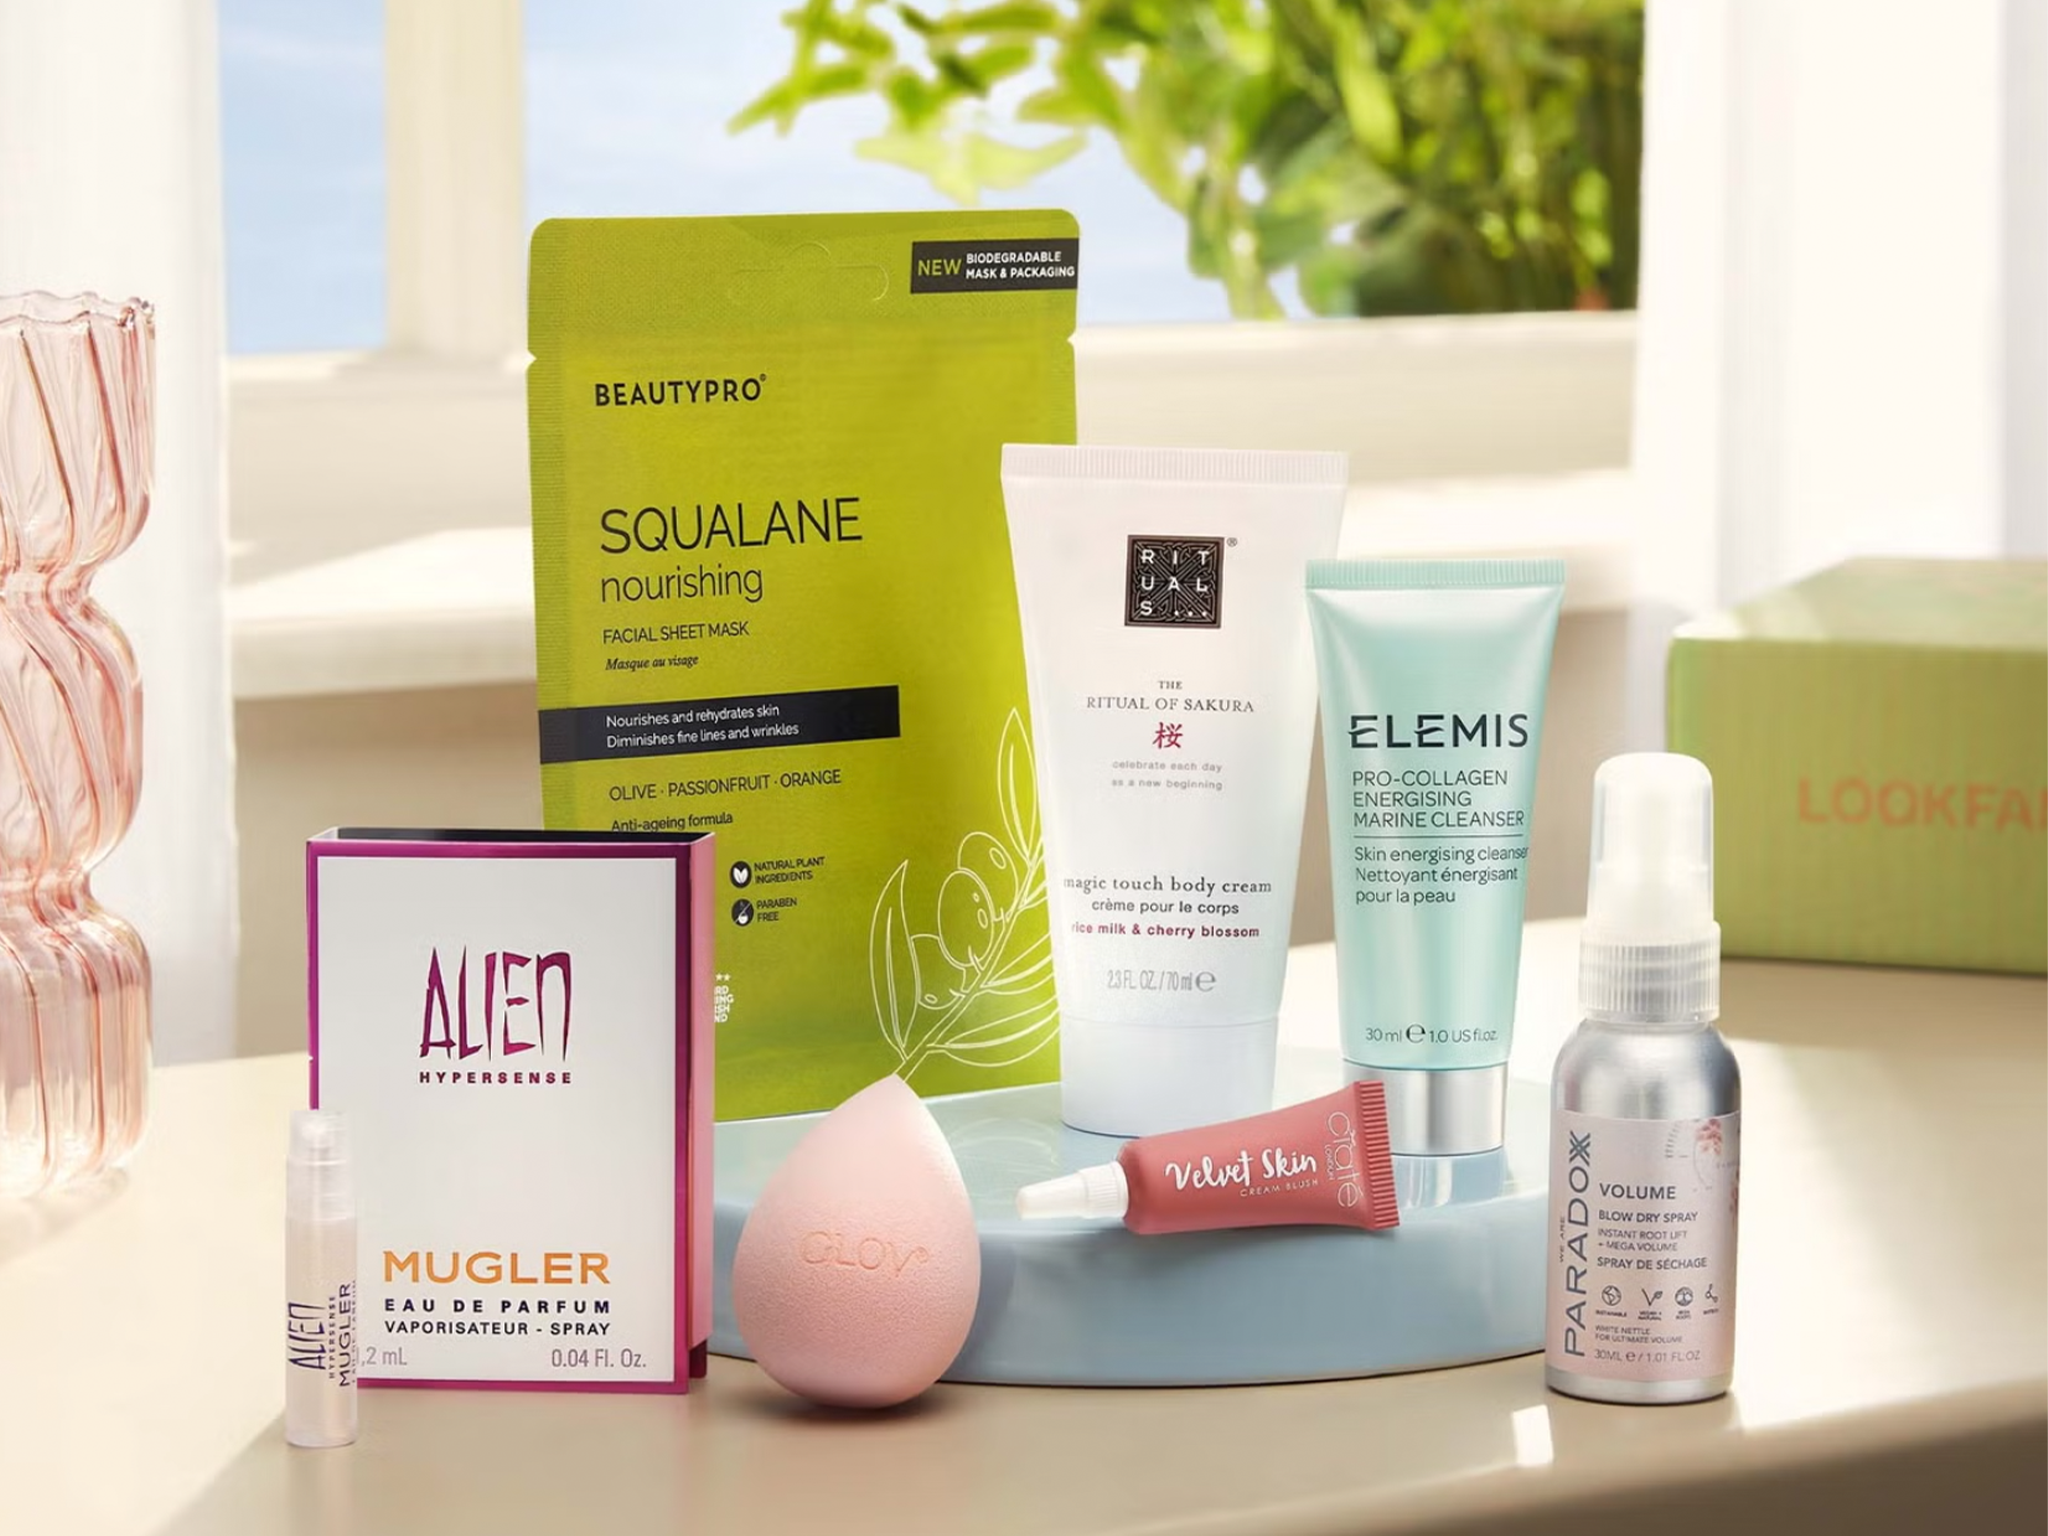 An example of one of the Lookfantastic beauty boxes